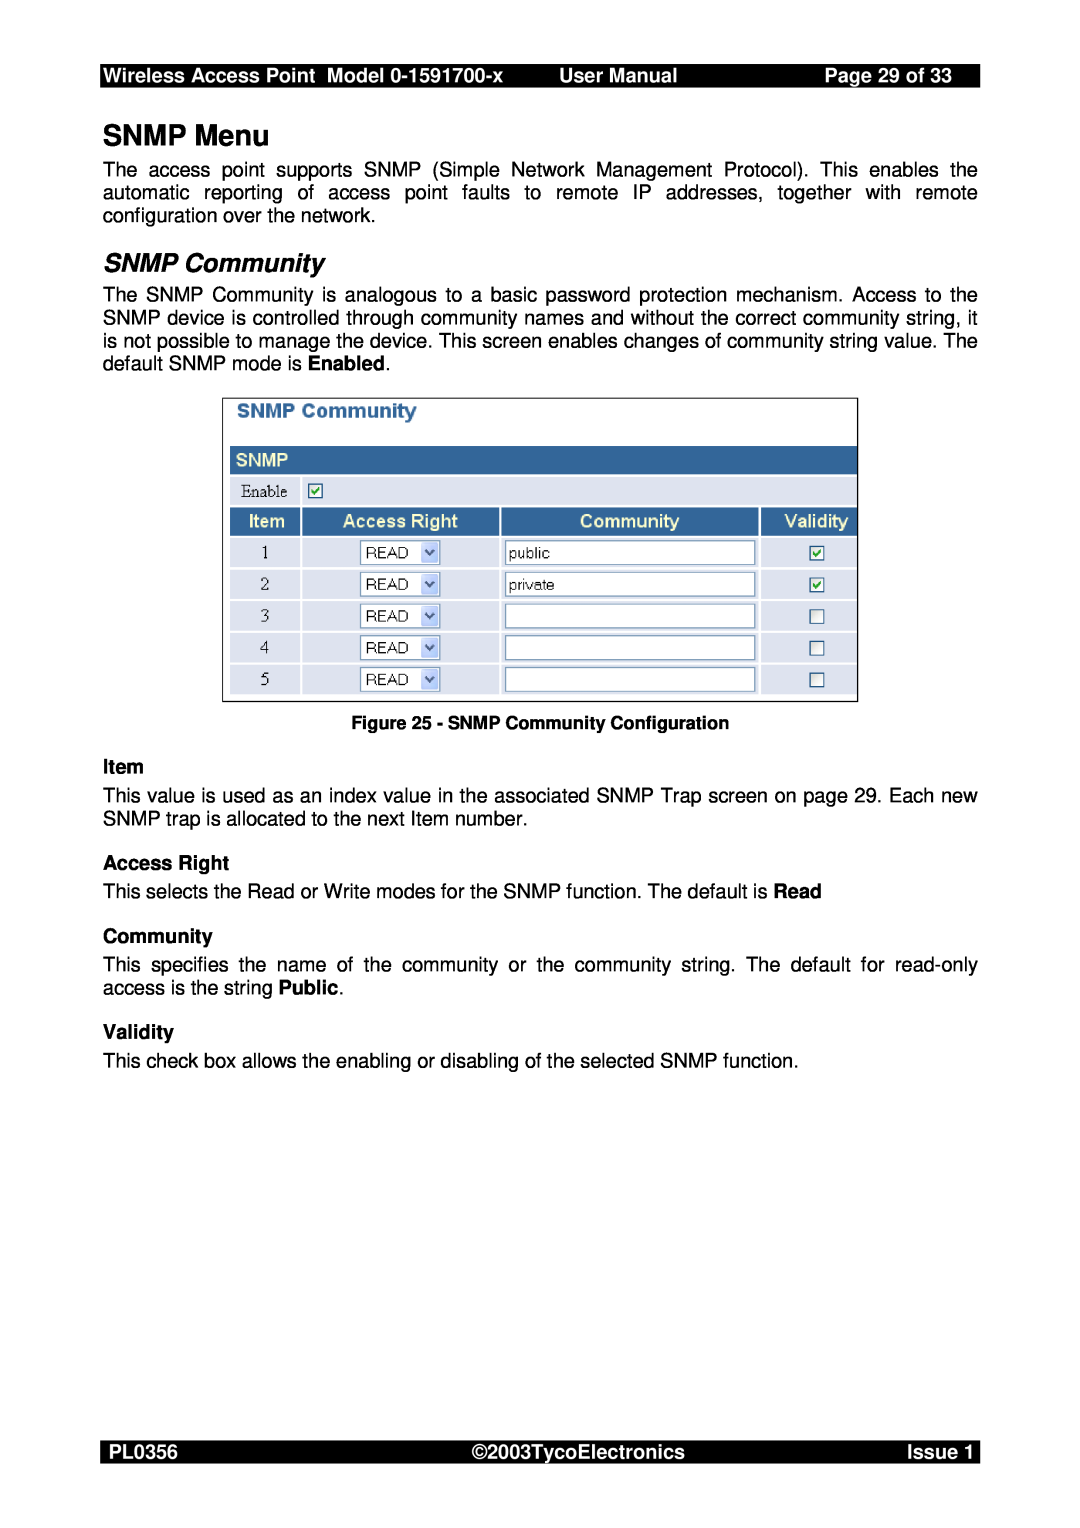 Tyco 0-1591700-x user manual SNMP Menu, SNMP Community, Page 29 of, Wireless Access Point Model, User Manual, PL0356, Issue 